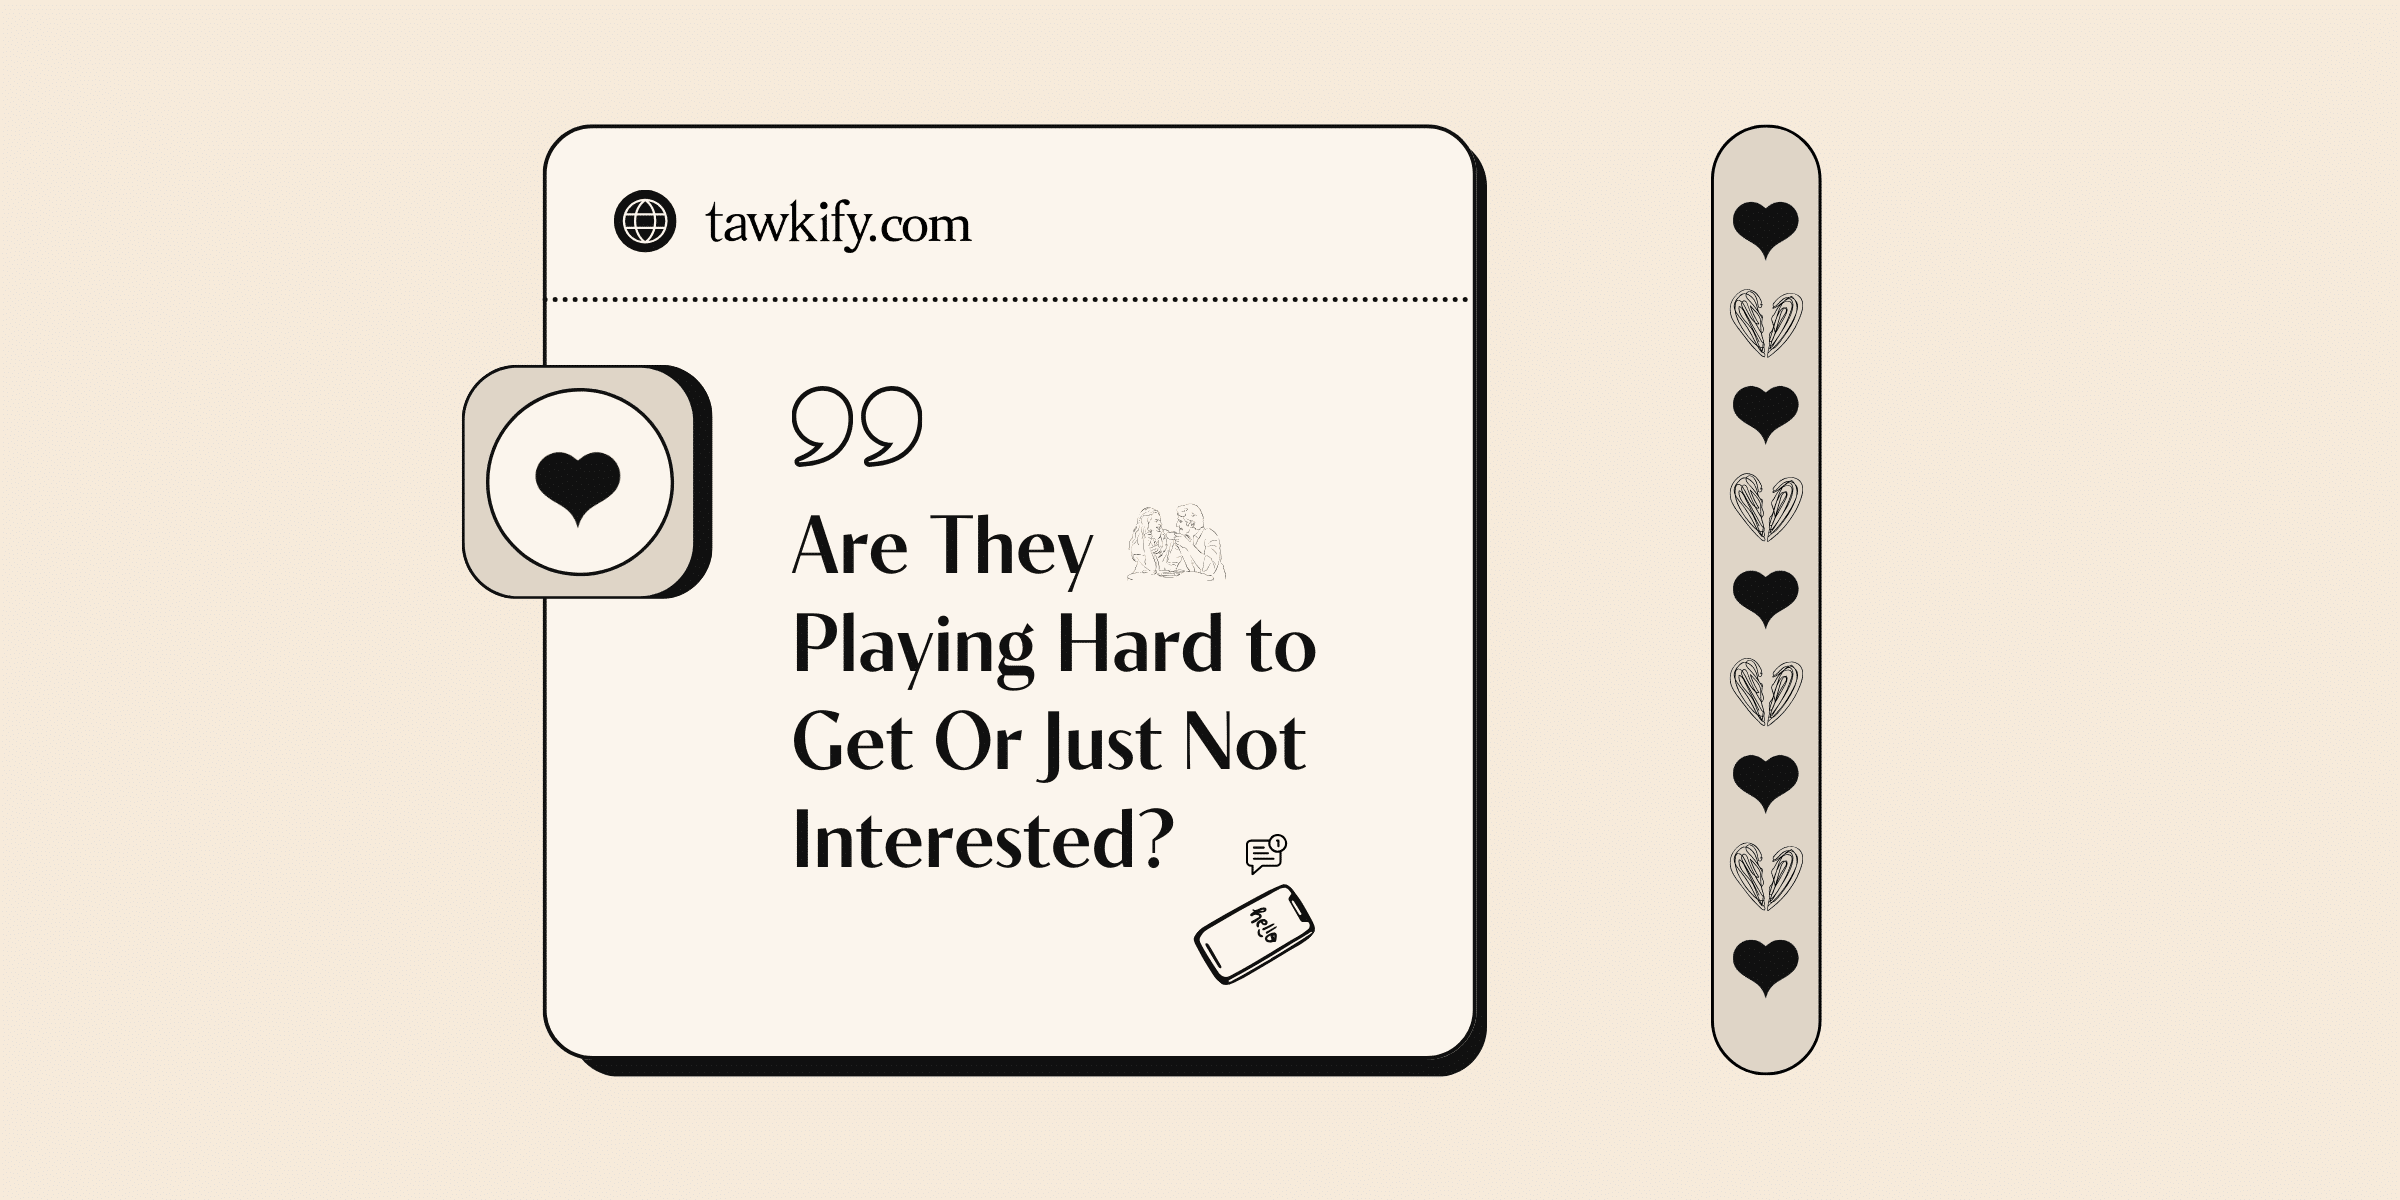 How can you tell if they’re playing hard to get or not interested in you? Follow our guide to find out some of the tell-tale signs!